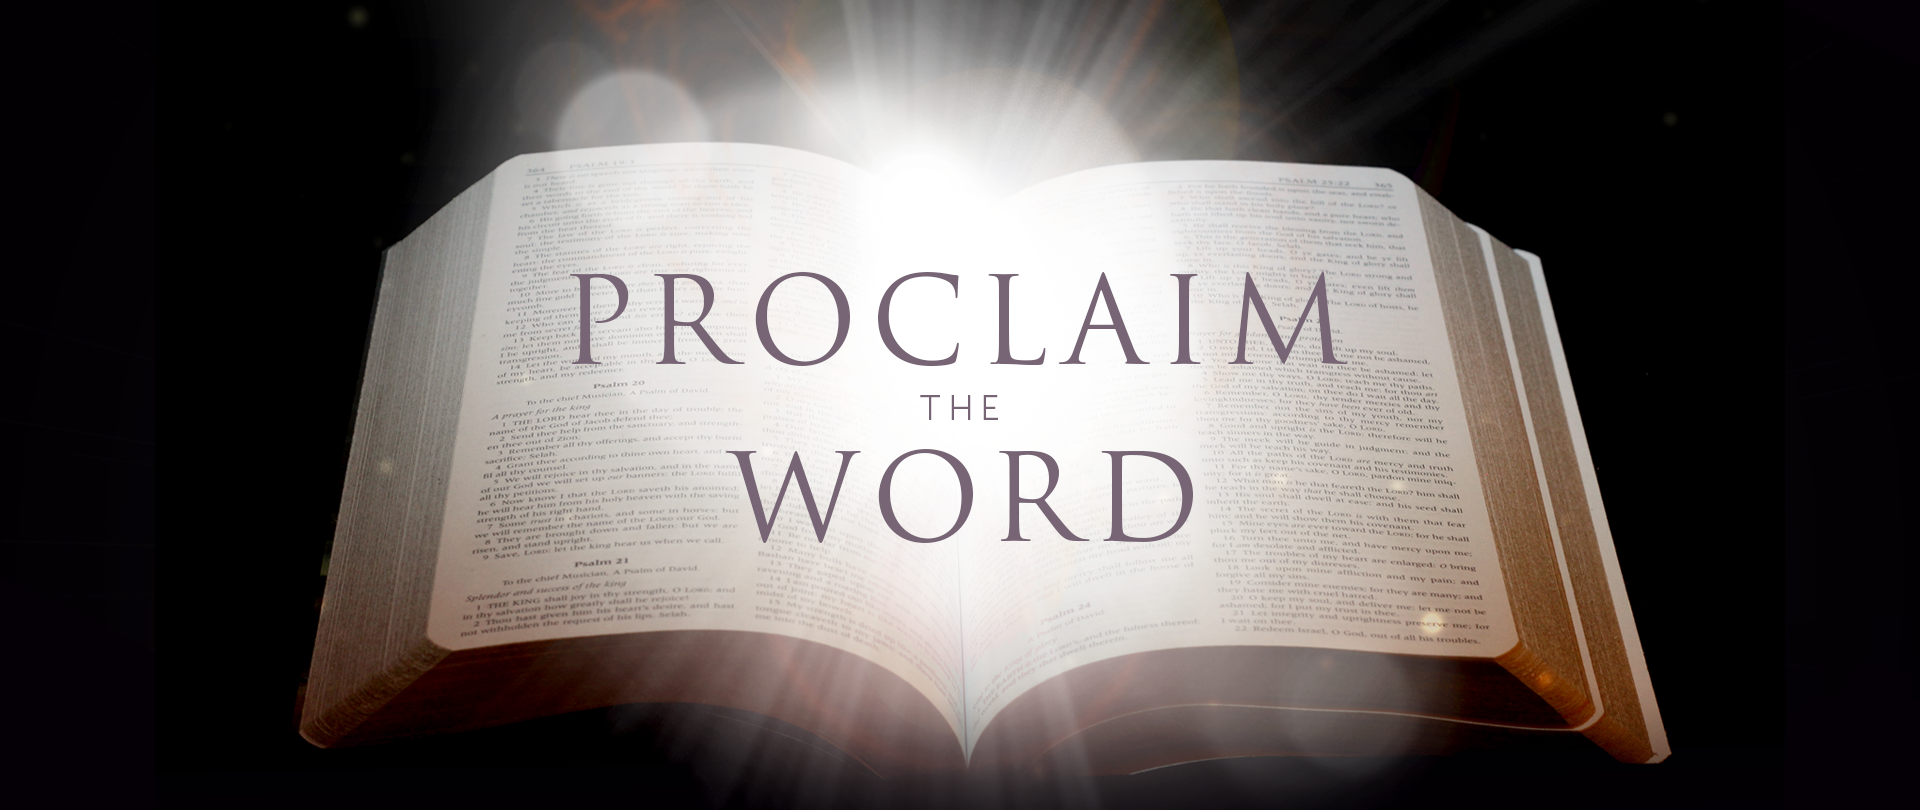 Missions Conference 2024
"Proclaim the Word"
Through Sunday, March 3
